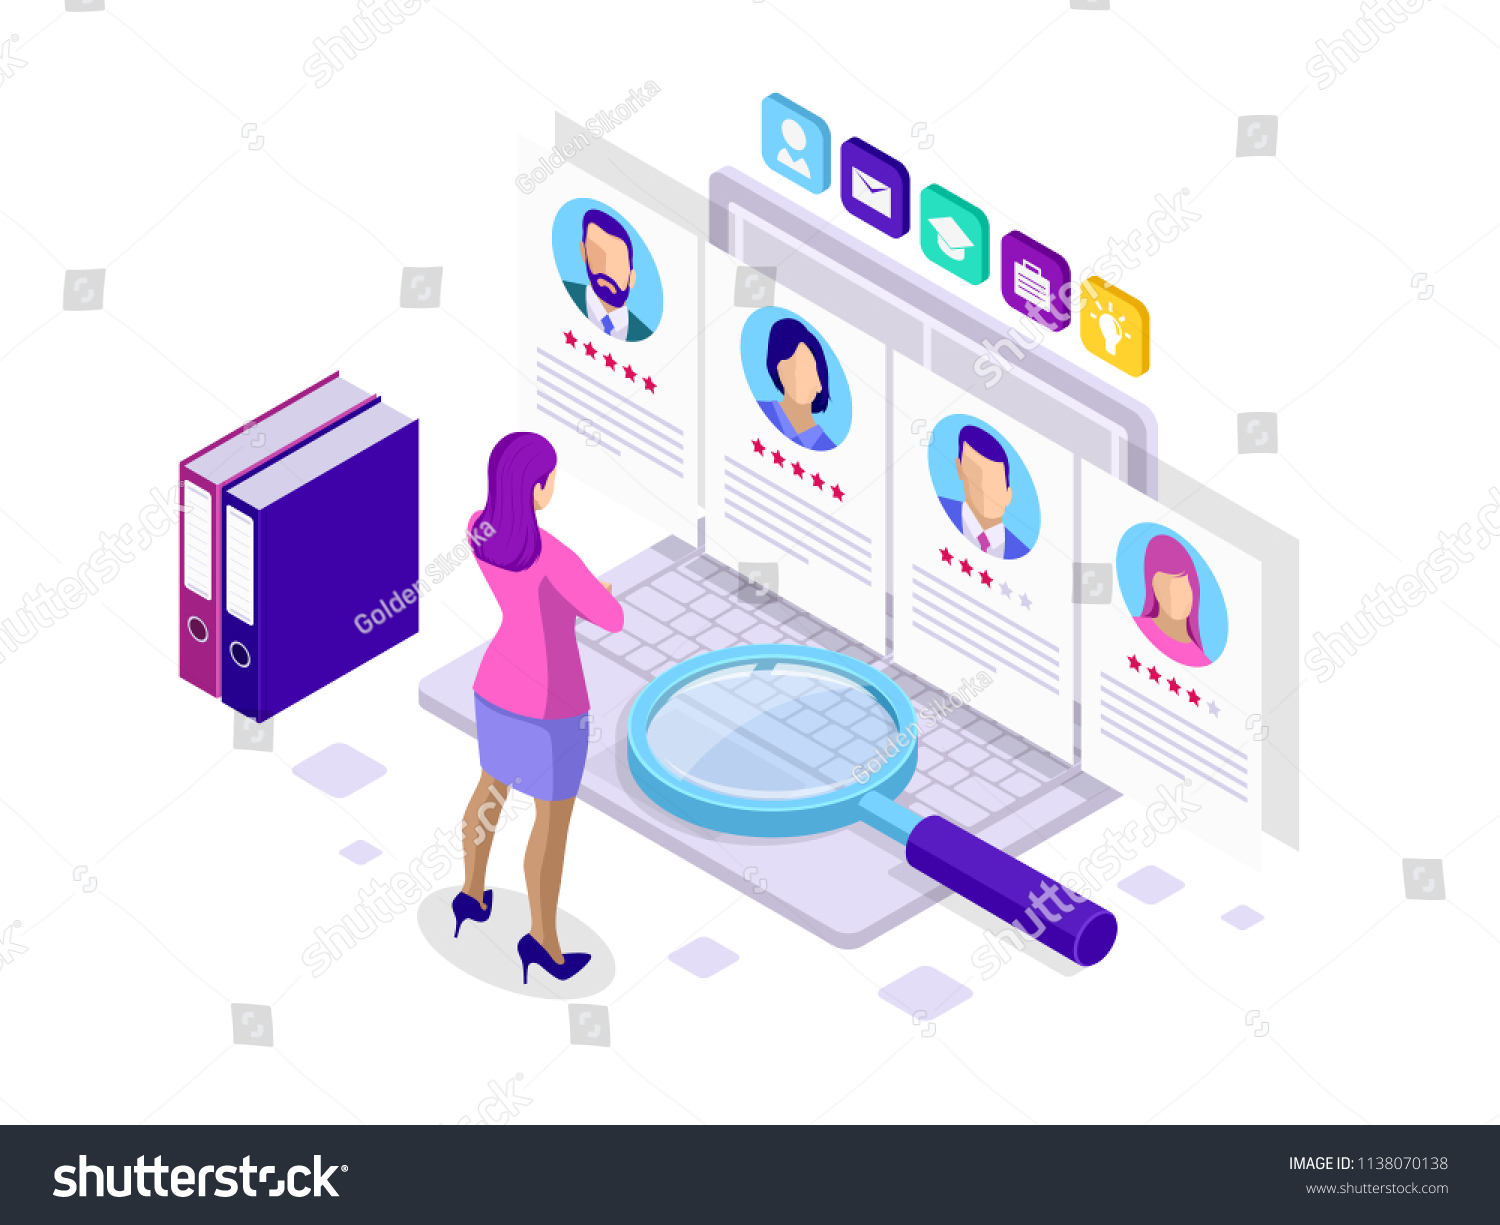 Isometric hiring and recruitment concept for web page, banner, presentation. Job interview, recruitment agency vector illustration #1138070138